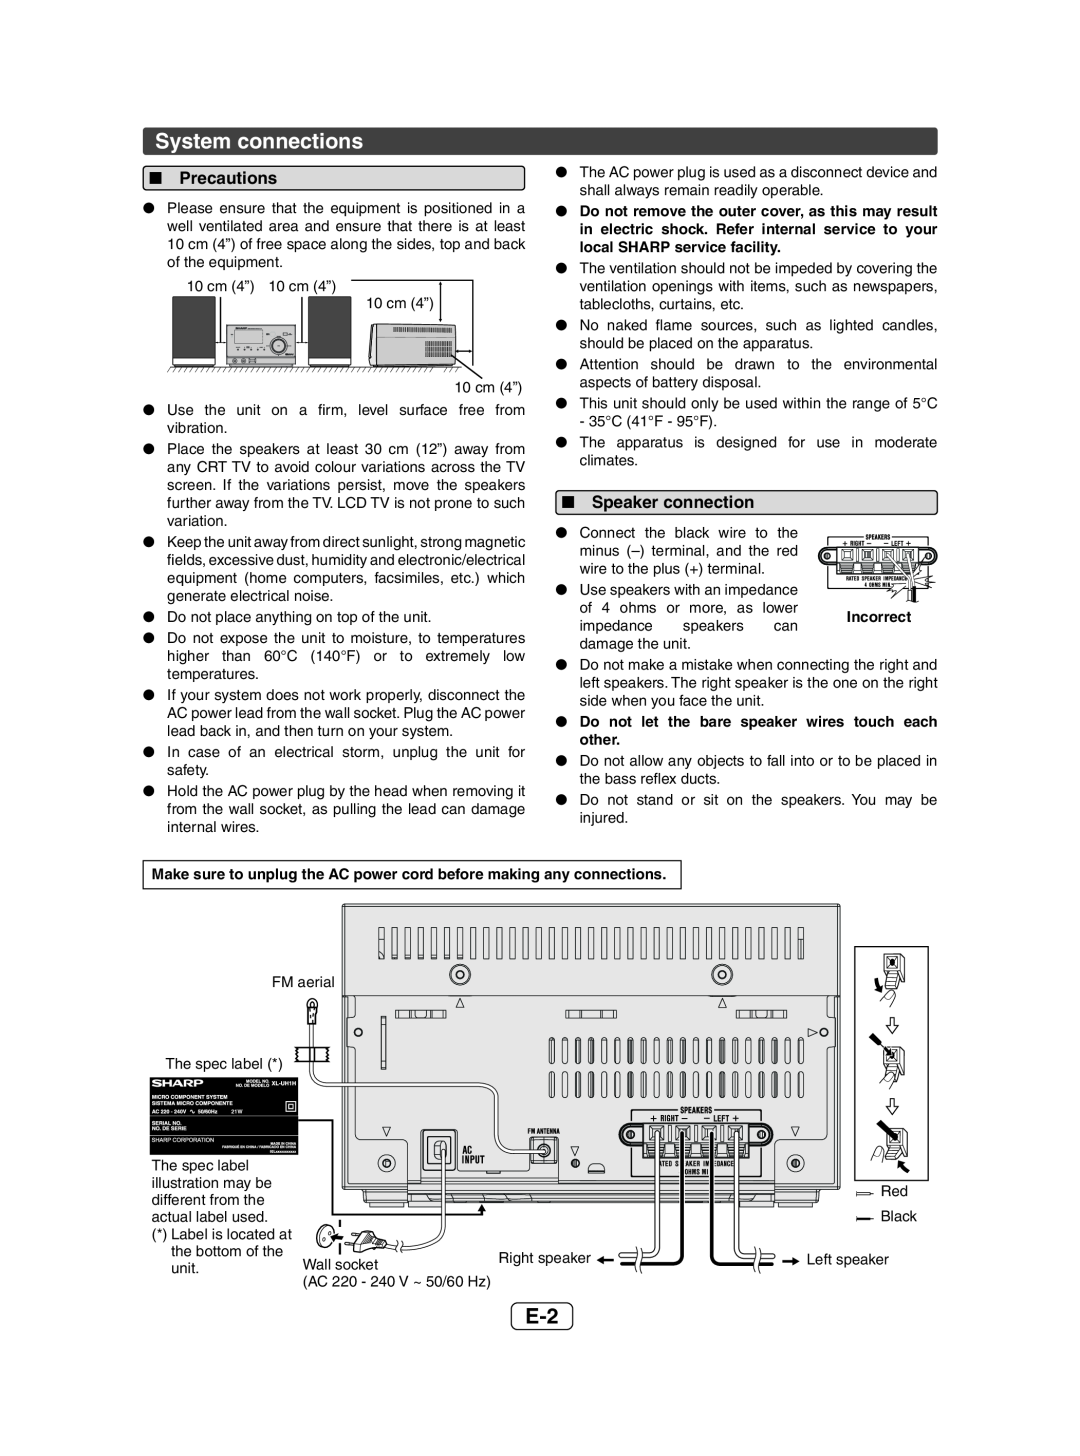 Sharp XL-UH05H, XL-UH1H operation manual System connections, Precautions, Speaker connection 